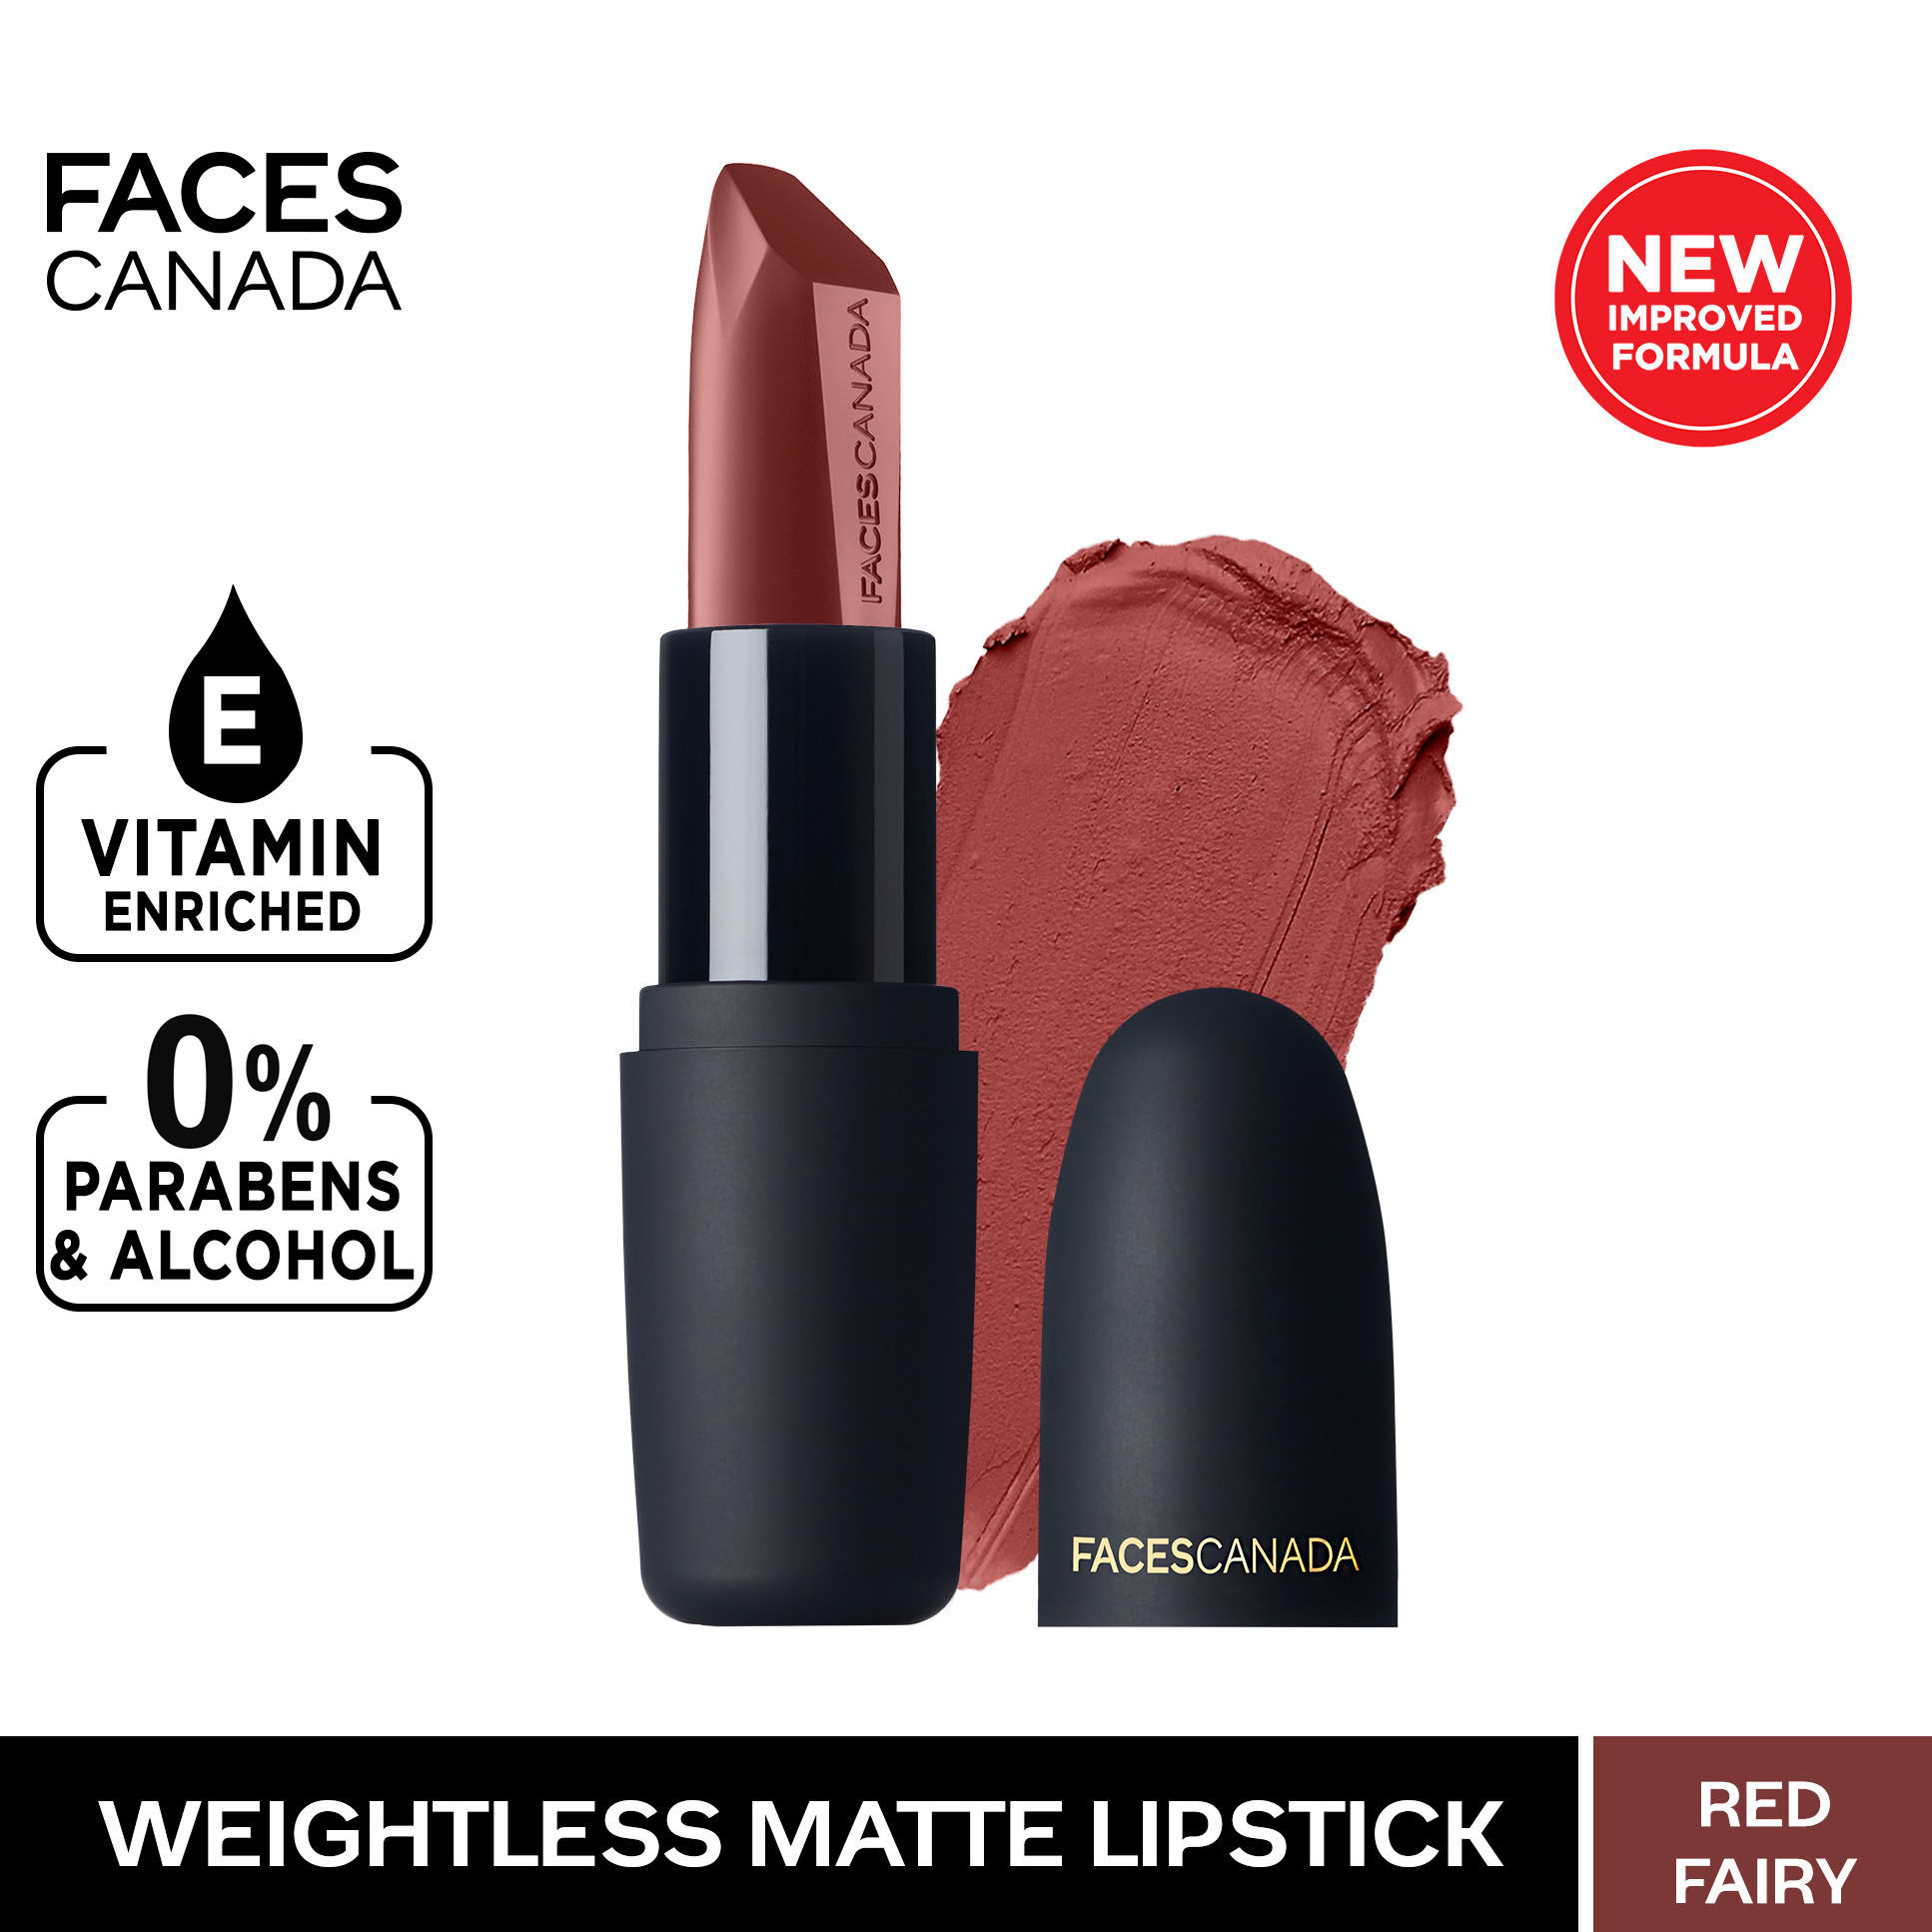 Faces Canada Weightless Matte Finish Lipstick - Red Fairy 23